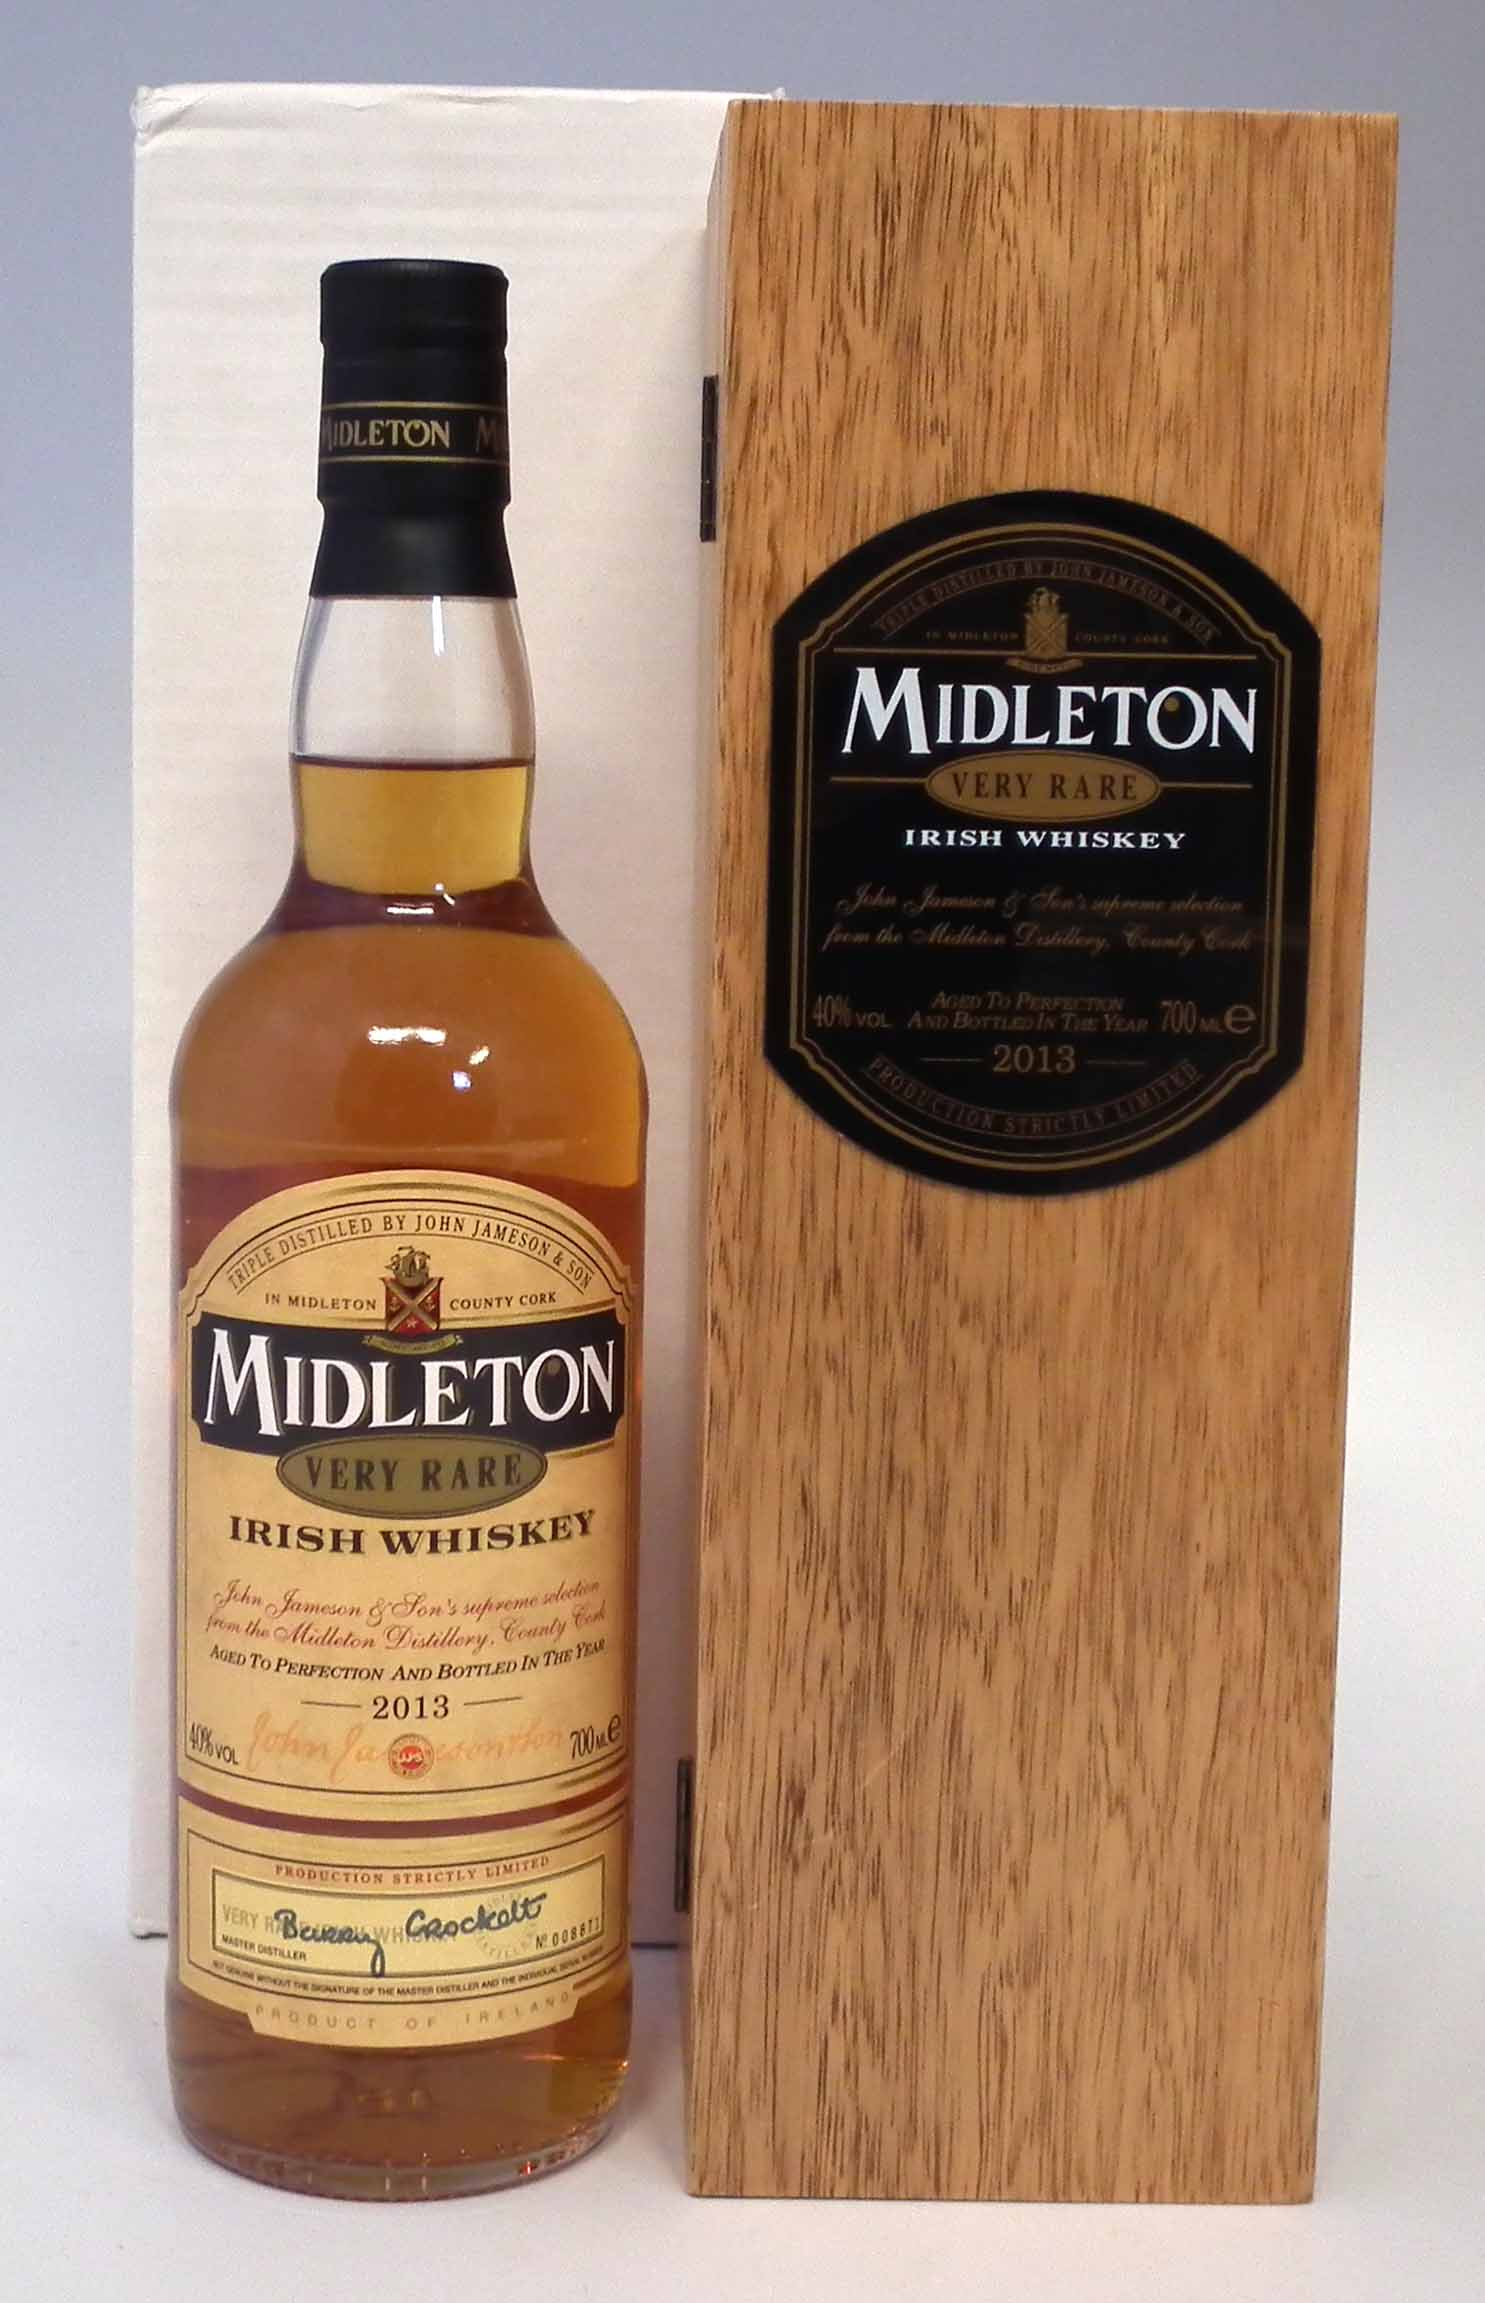 Midleton Very Rare Irish Whiskey - 2013 - 700ml number 8871 with wood box, card case, certificate